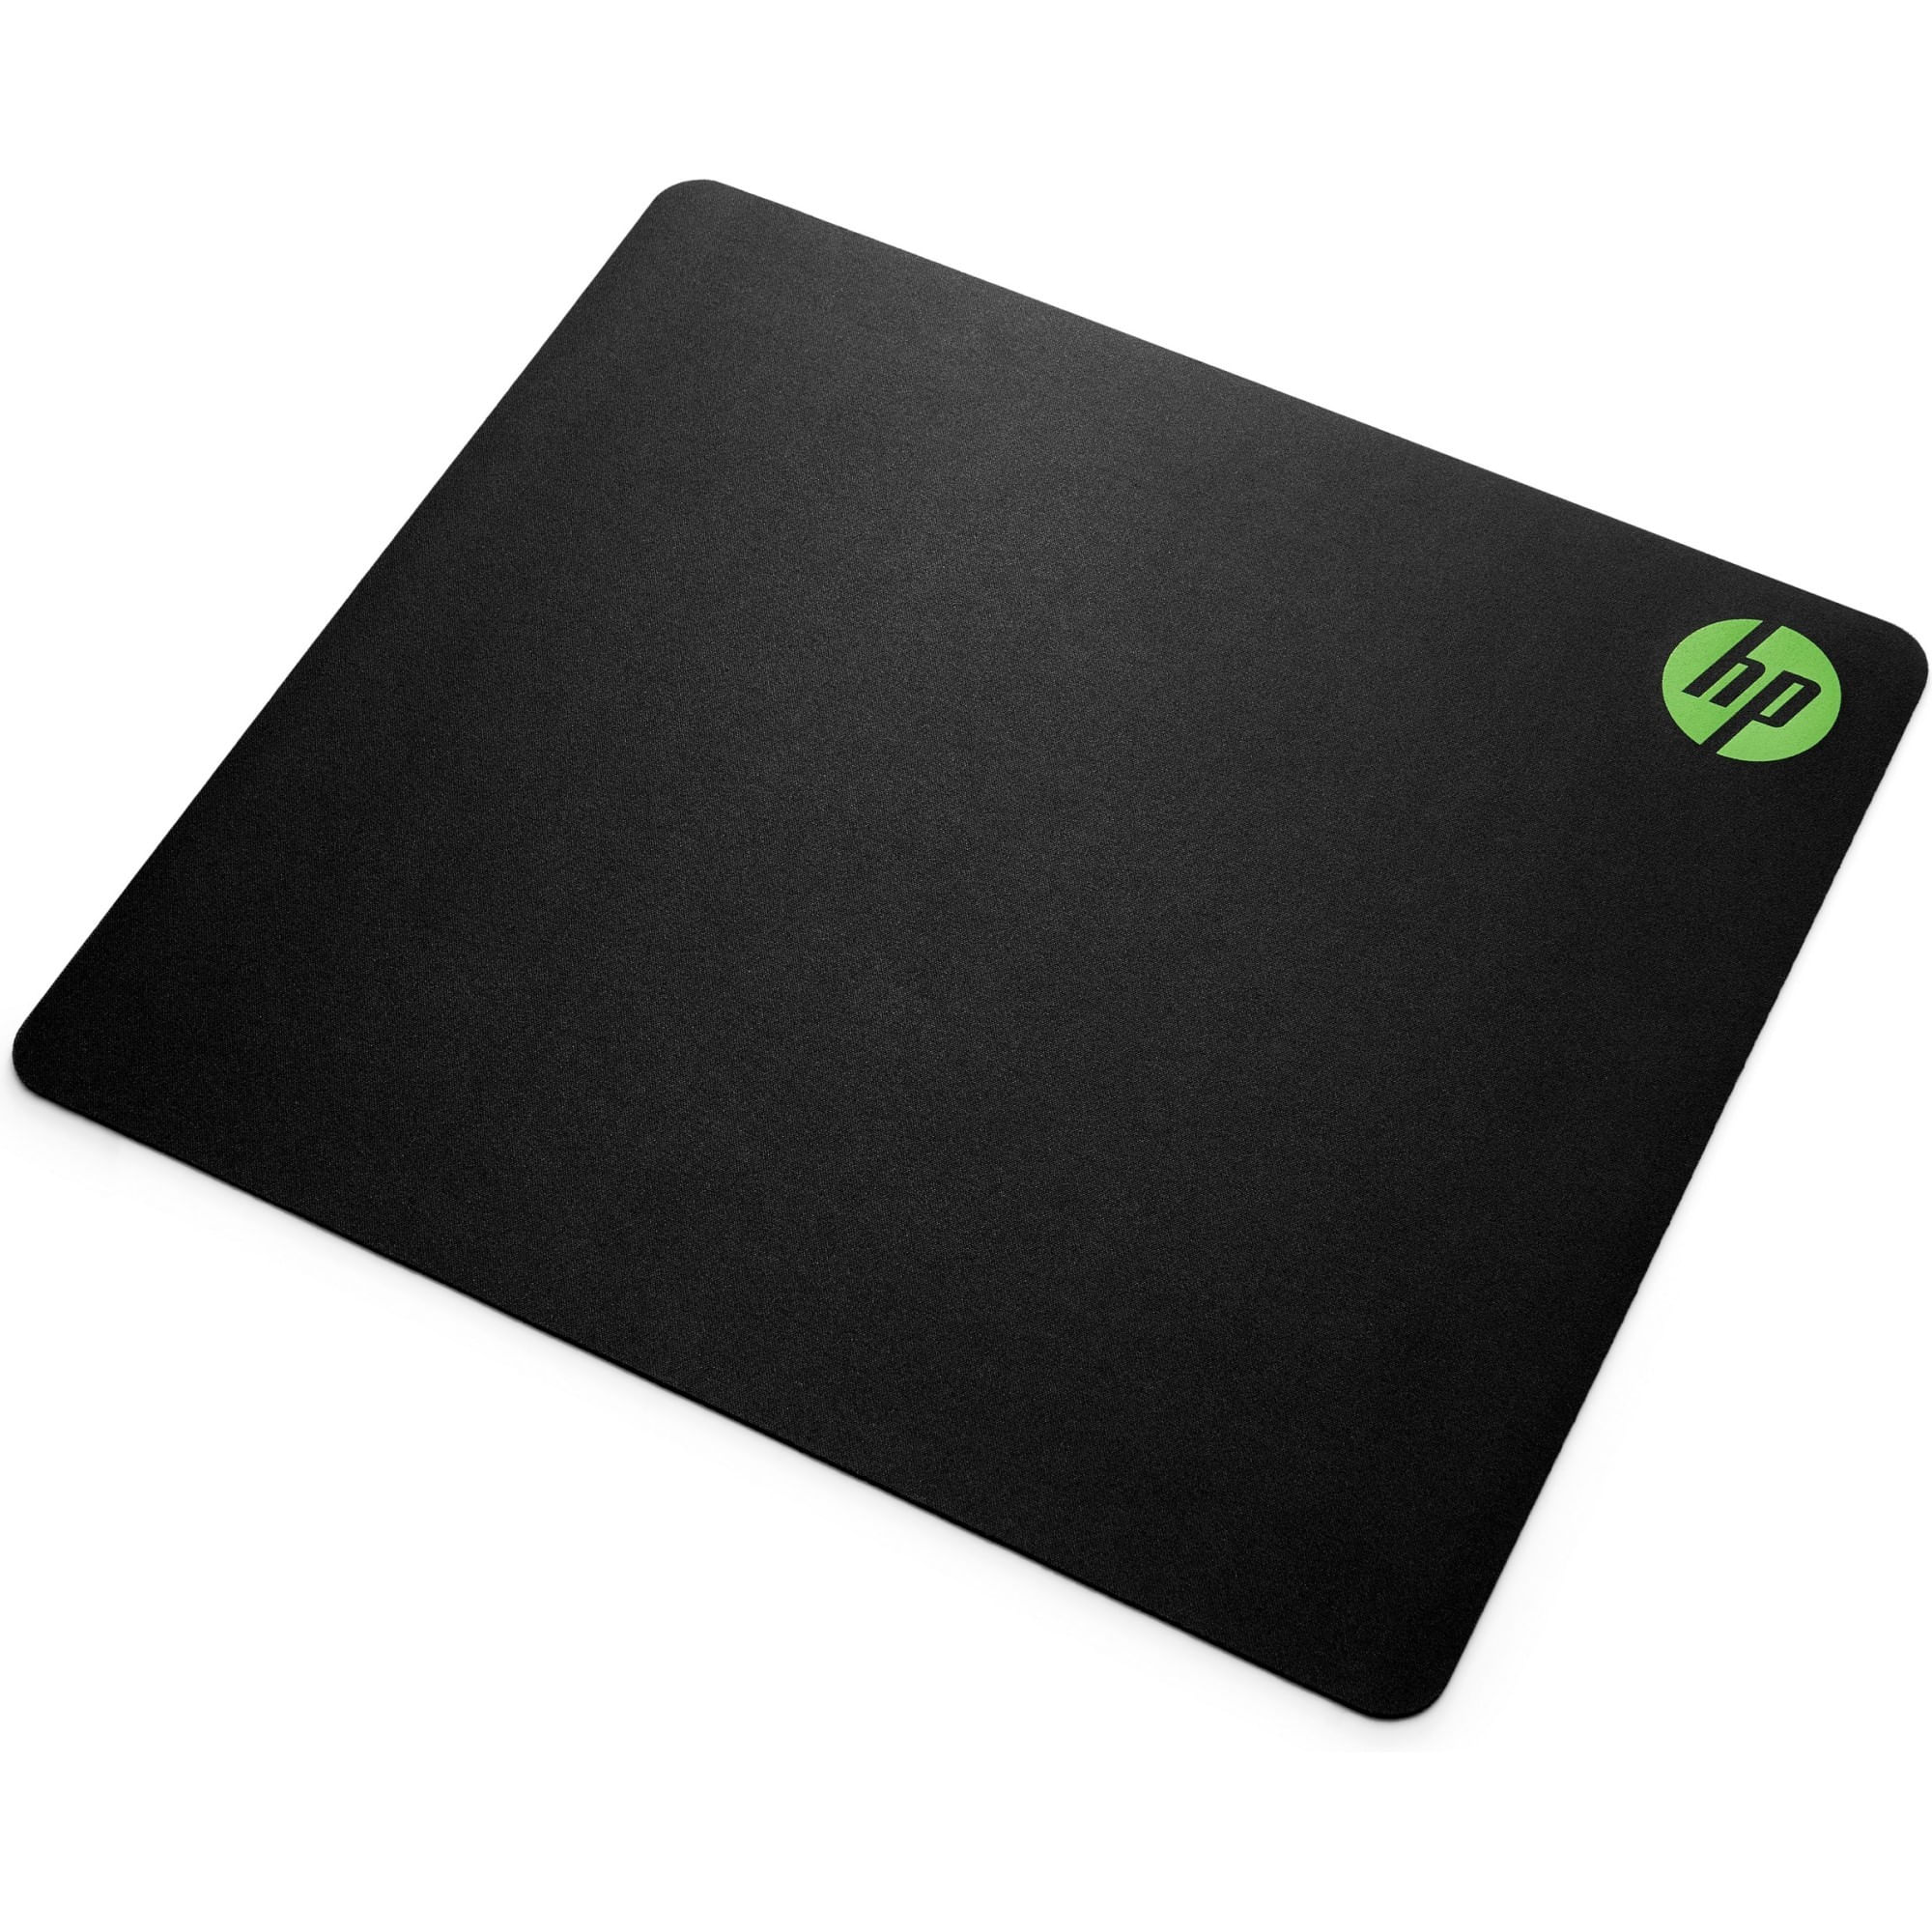 Mouse Pad HP Pavilion 300 Gaming Negro - 4PZ84AA